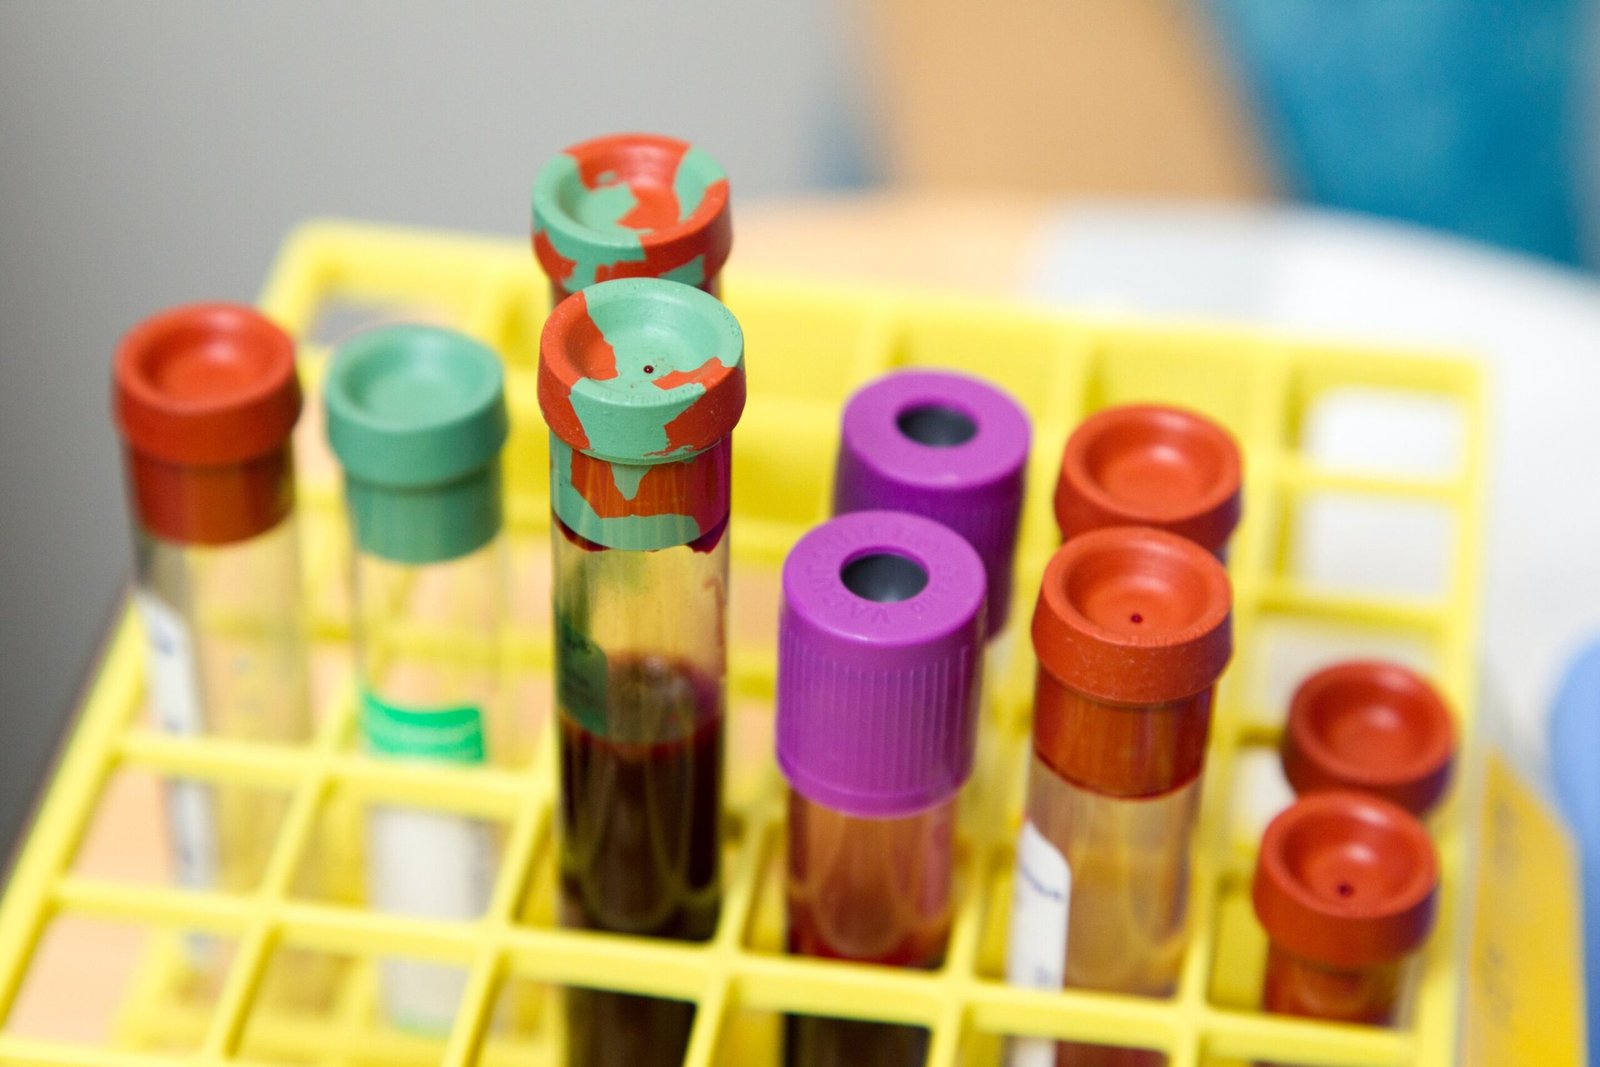 Alzheimer’s blood test found to perform as well as FDA-approved spinal fluid tests